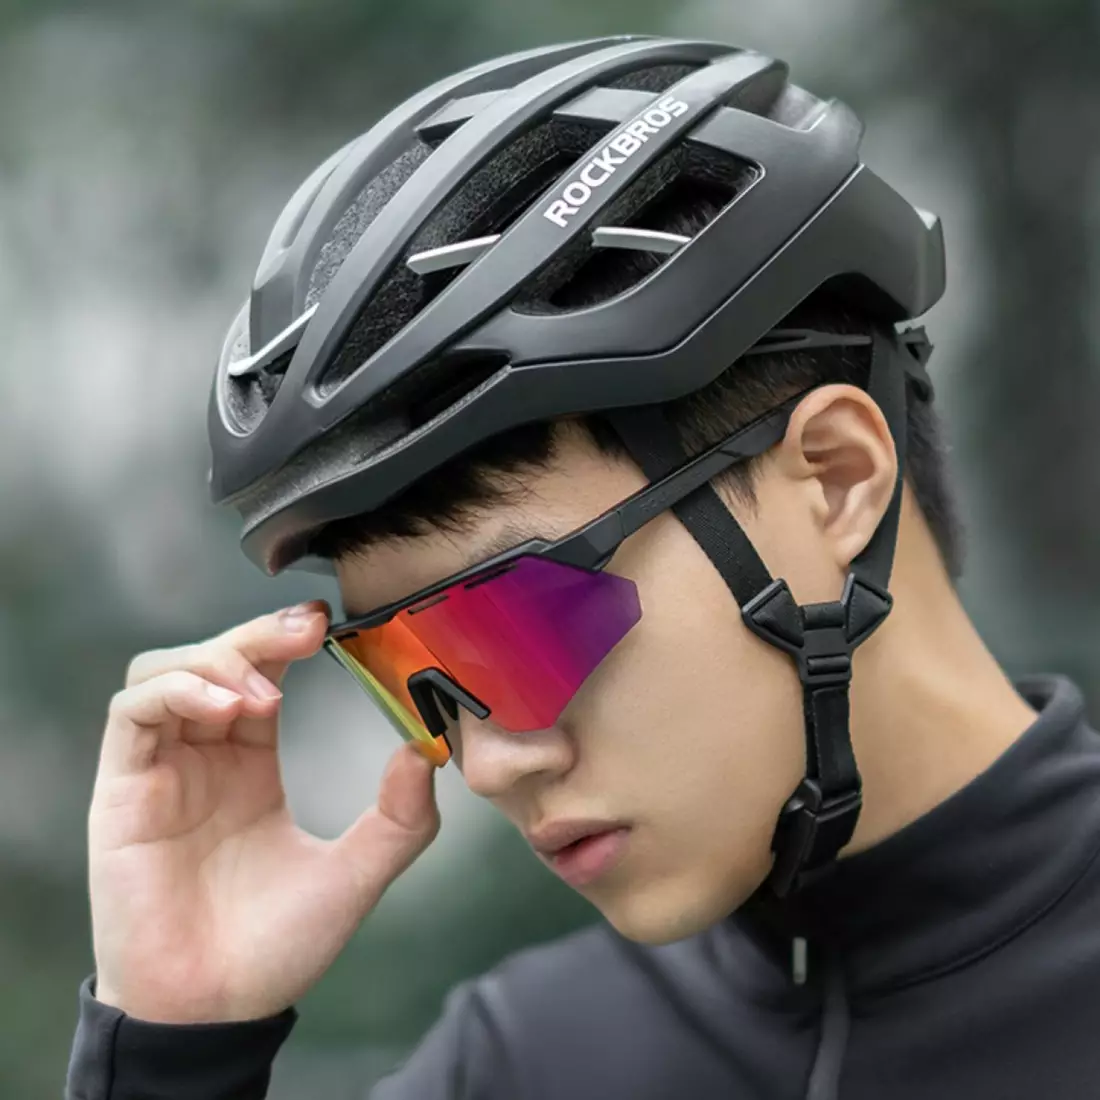 Watch This Before Buying ROCKBROS Clear Sunglasses Glasses for Biking 